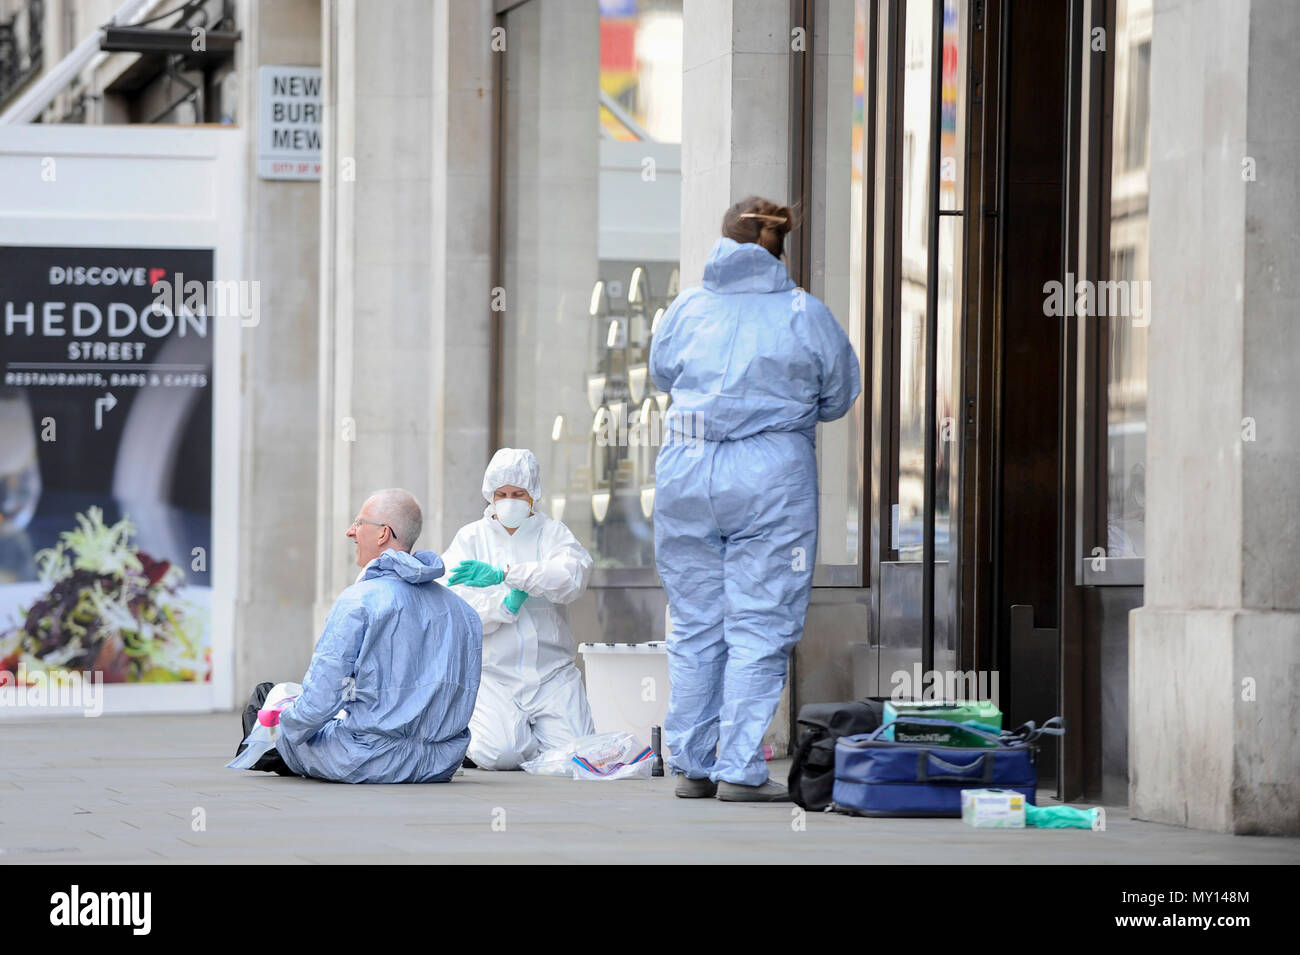 London, UK.  5 June 2018.  Members of a forensics team examines the scene outside the Watches of Switzerland on Regent Street.  Two motorcycles were involved in a smash and grab incident at the premises.  Investigations are ongoing. Credit: Stephen Chung / Alamy Live News Stock Photo